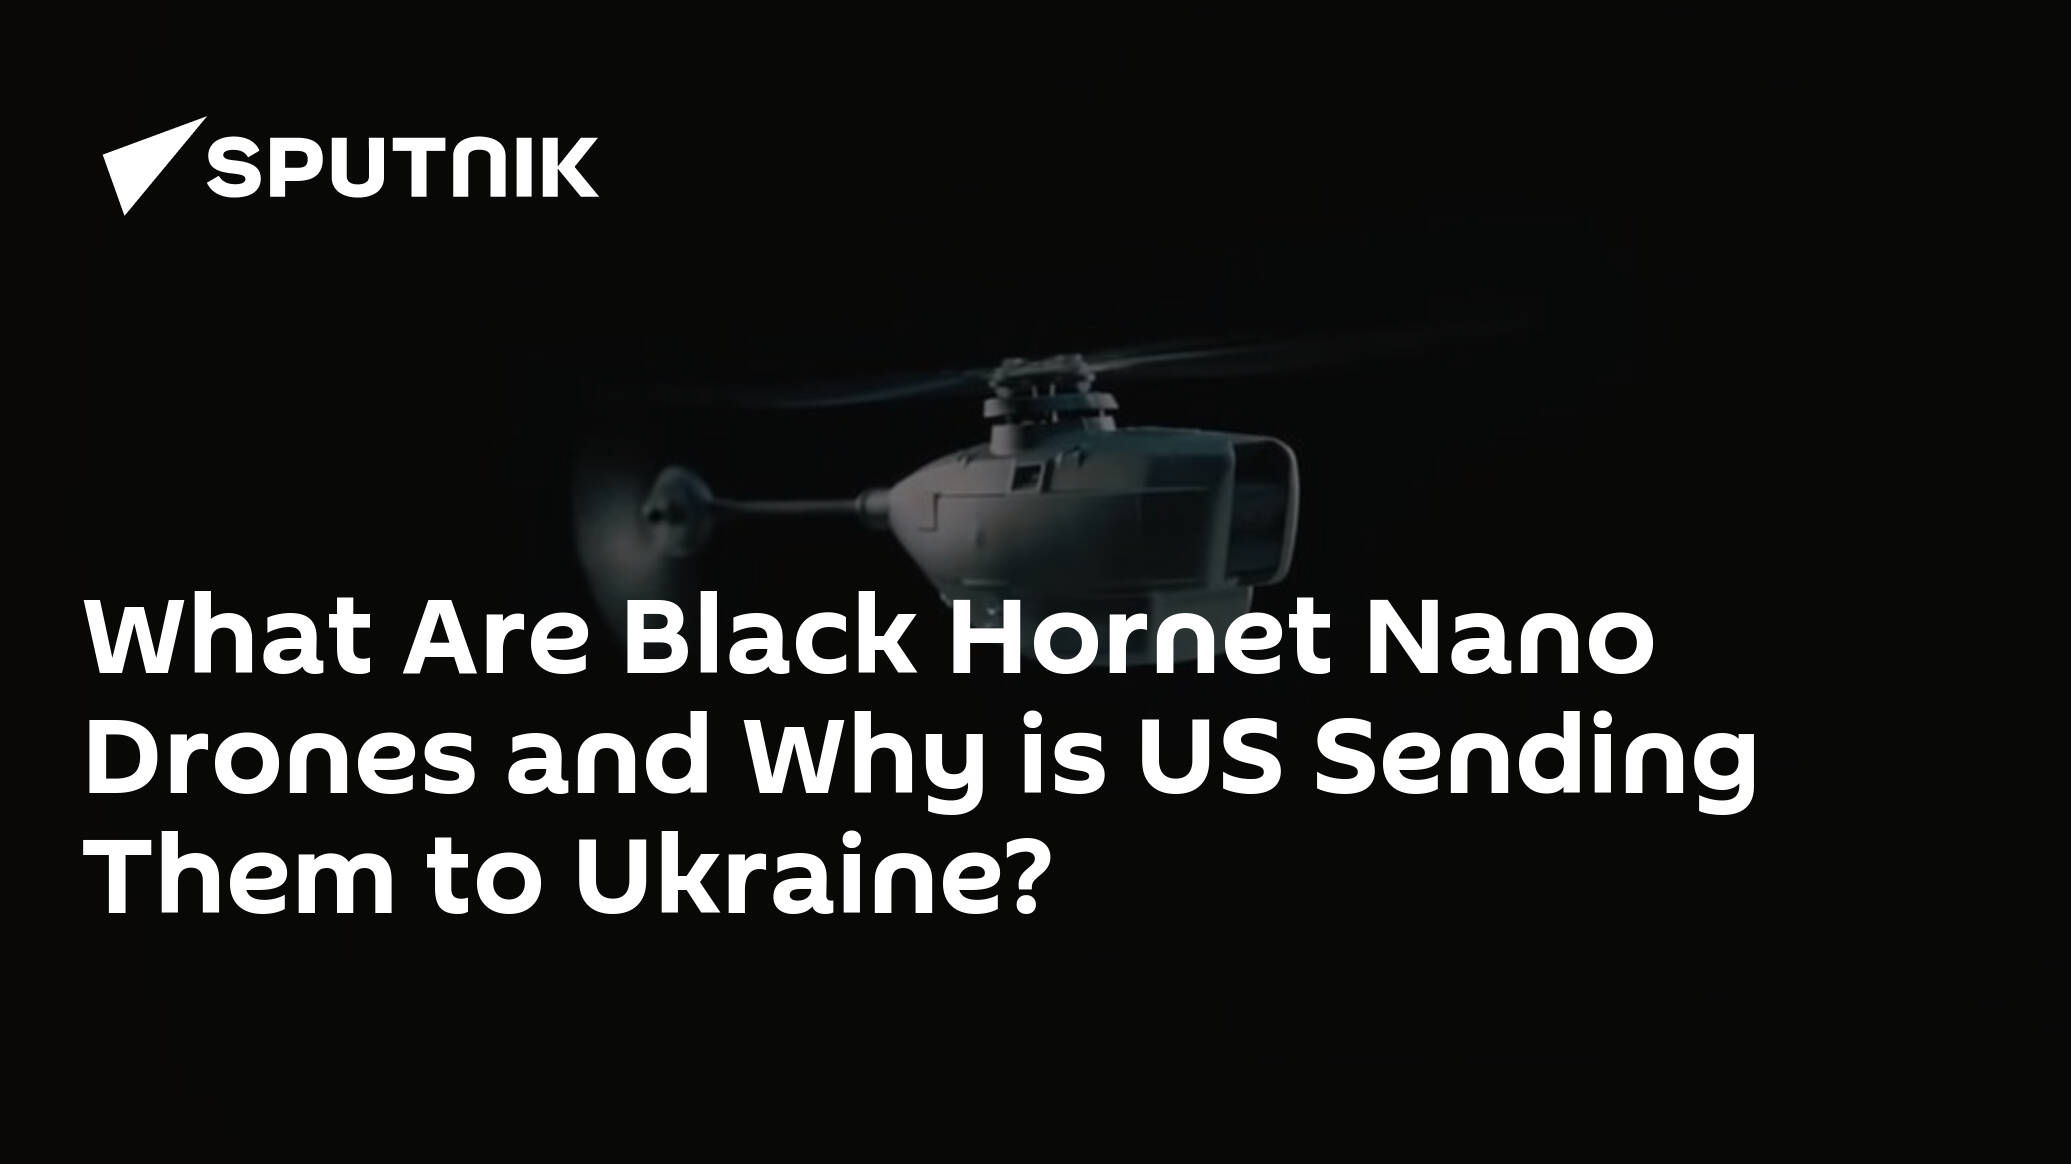 What Are Black Hornet Nano Drones and Why is US Sending Them to Ukraine?